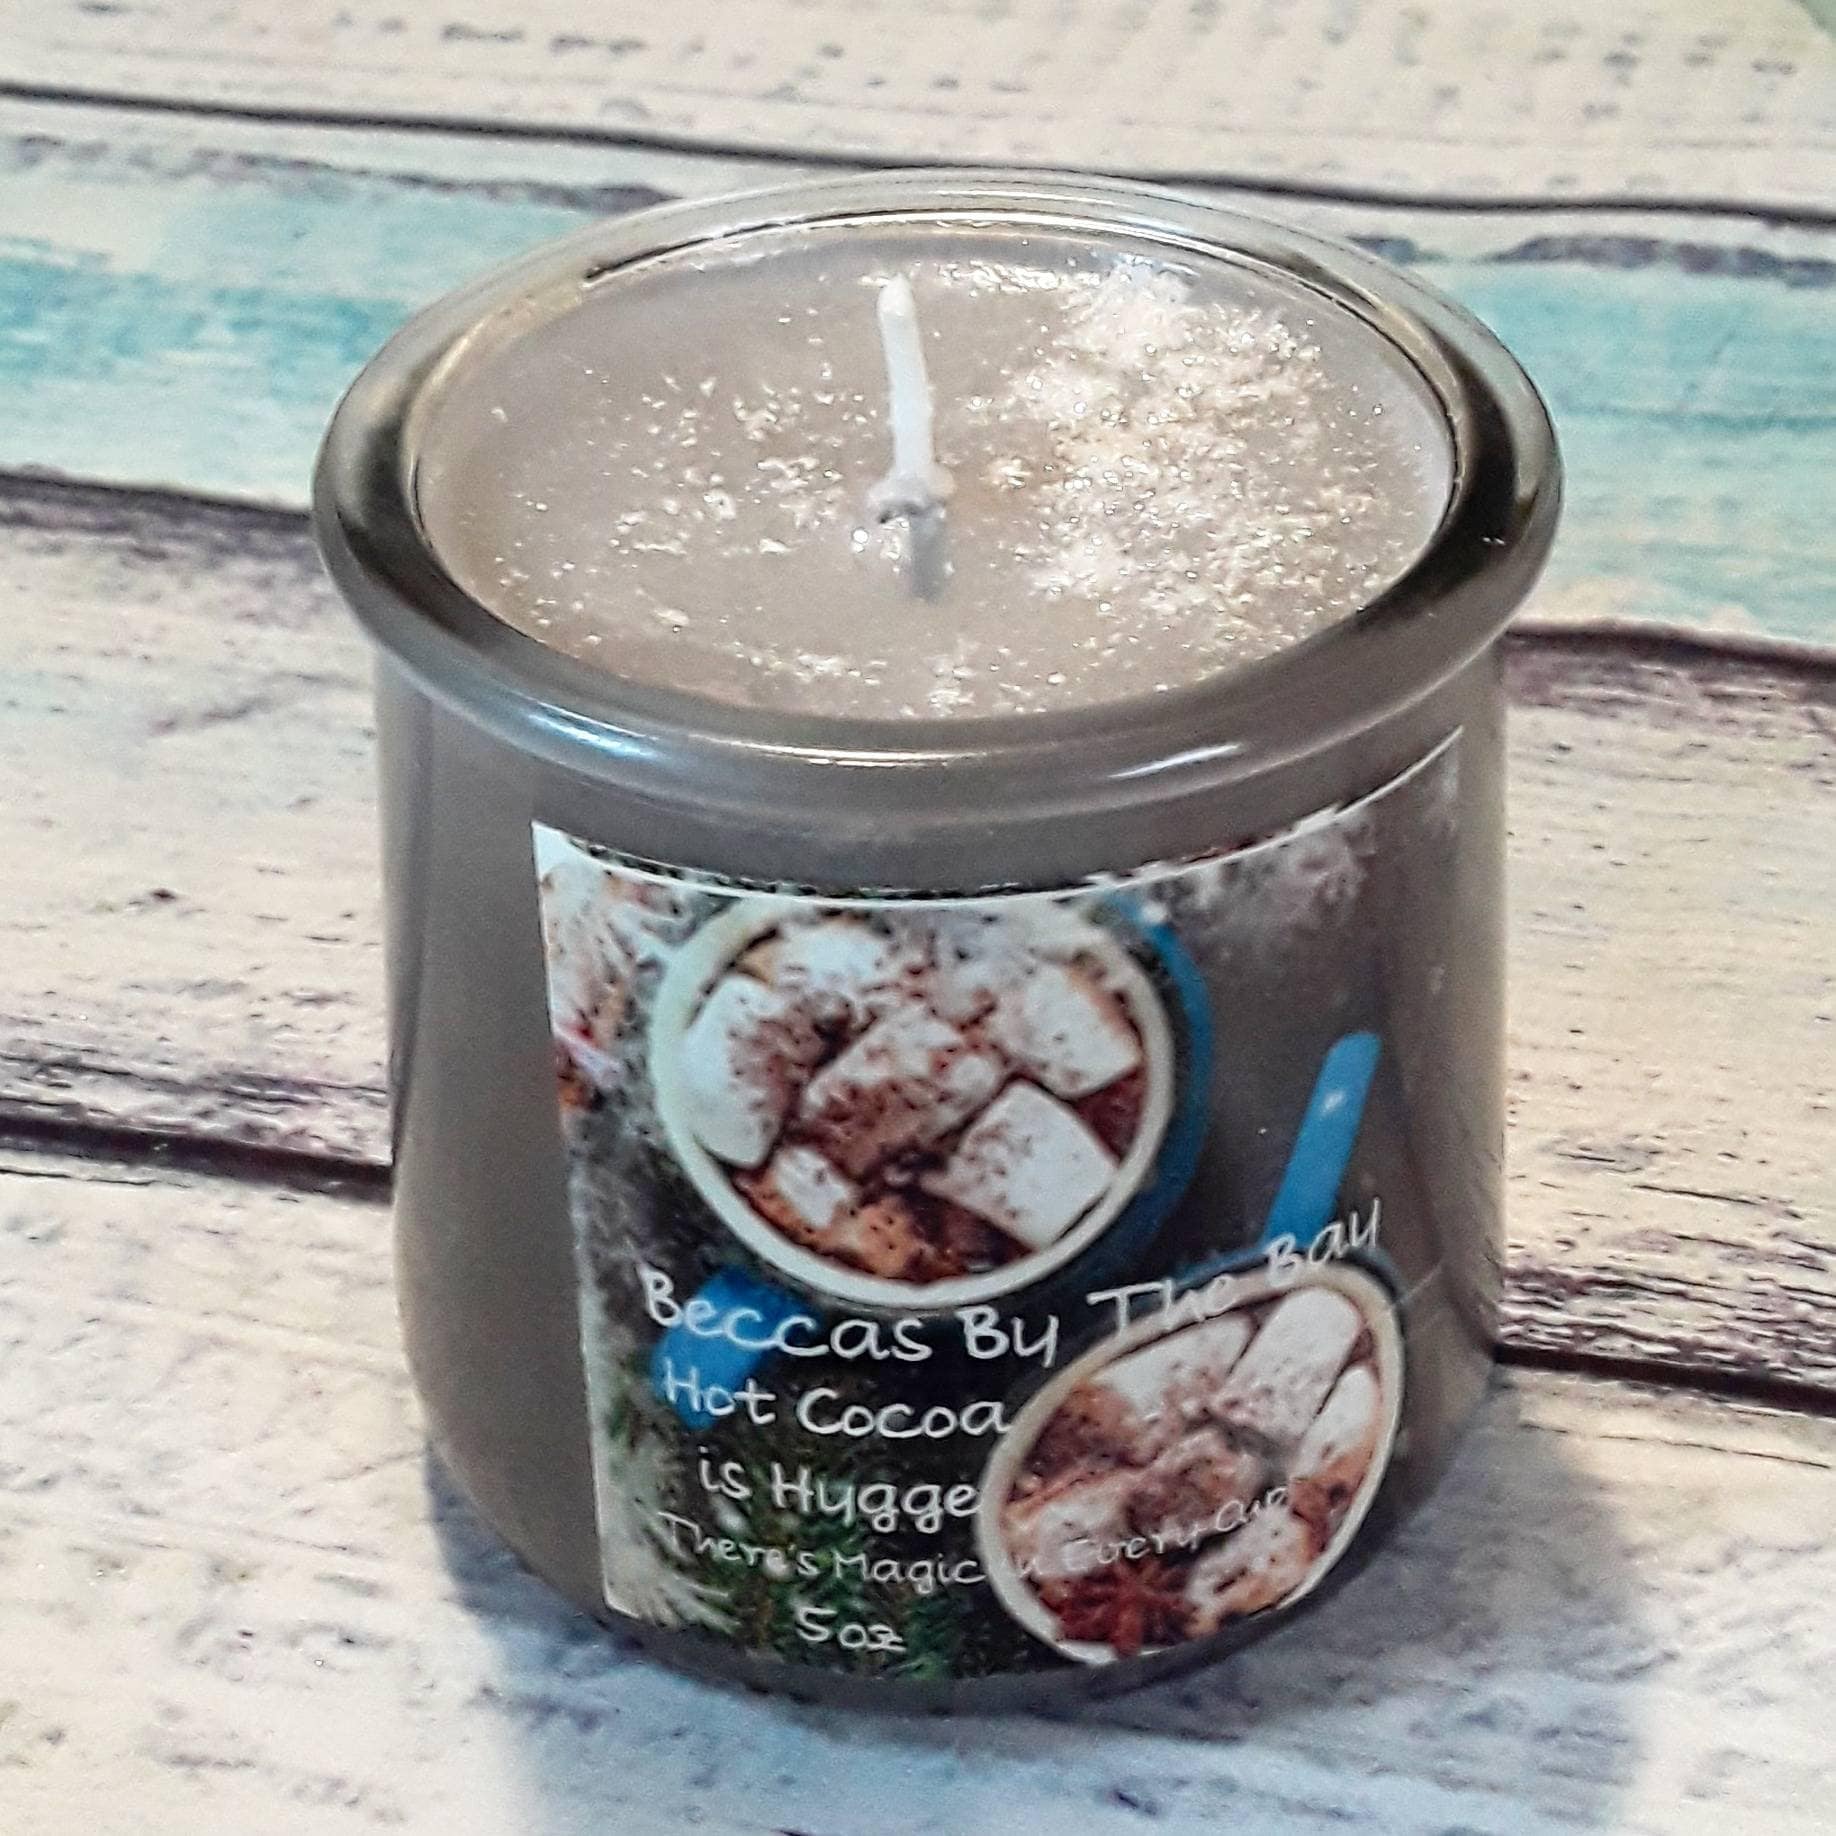 Hot Cocoa Scented Soy Candle  3 Sizes Available  Up-cycled Container  Father's Day Gift  Handmade Candle   Repurposed Candle